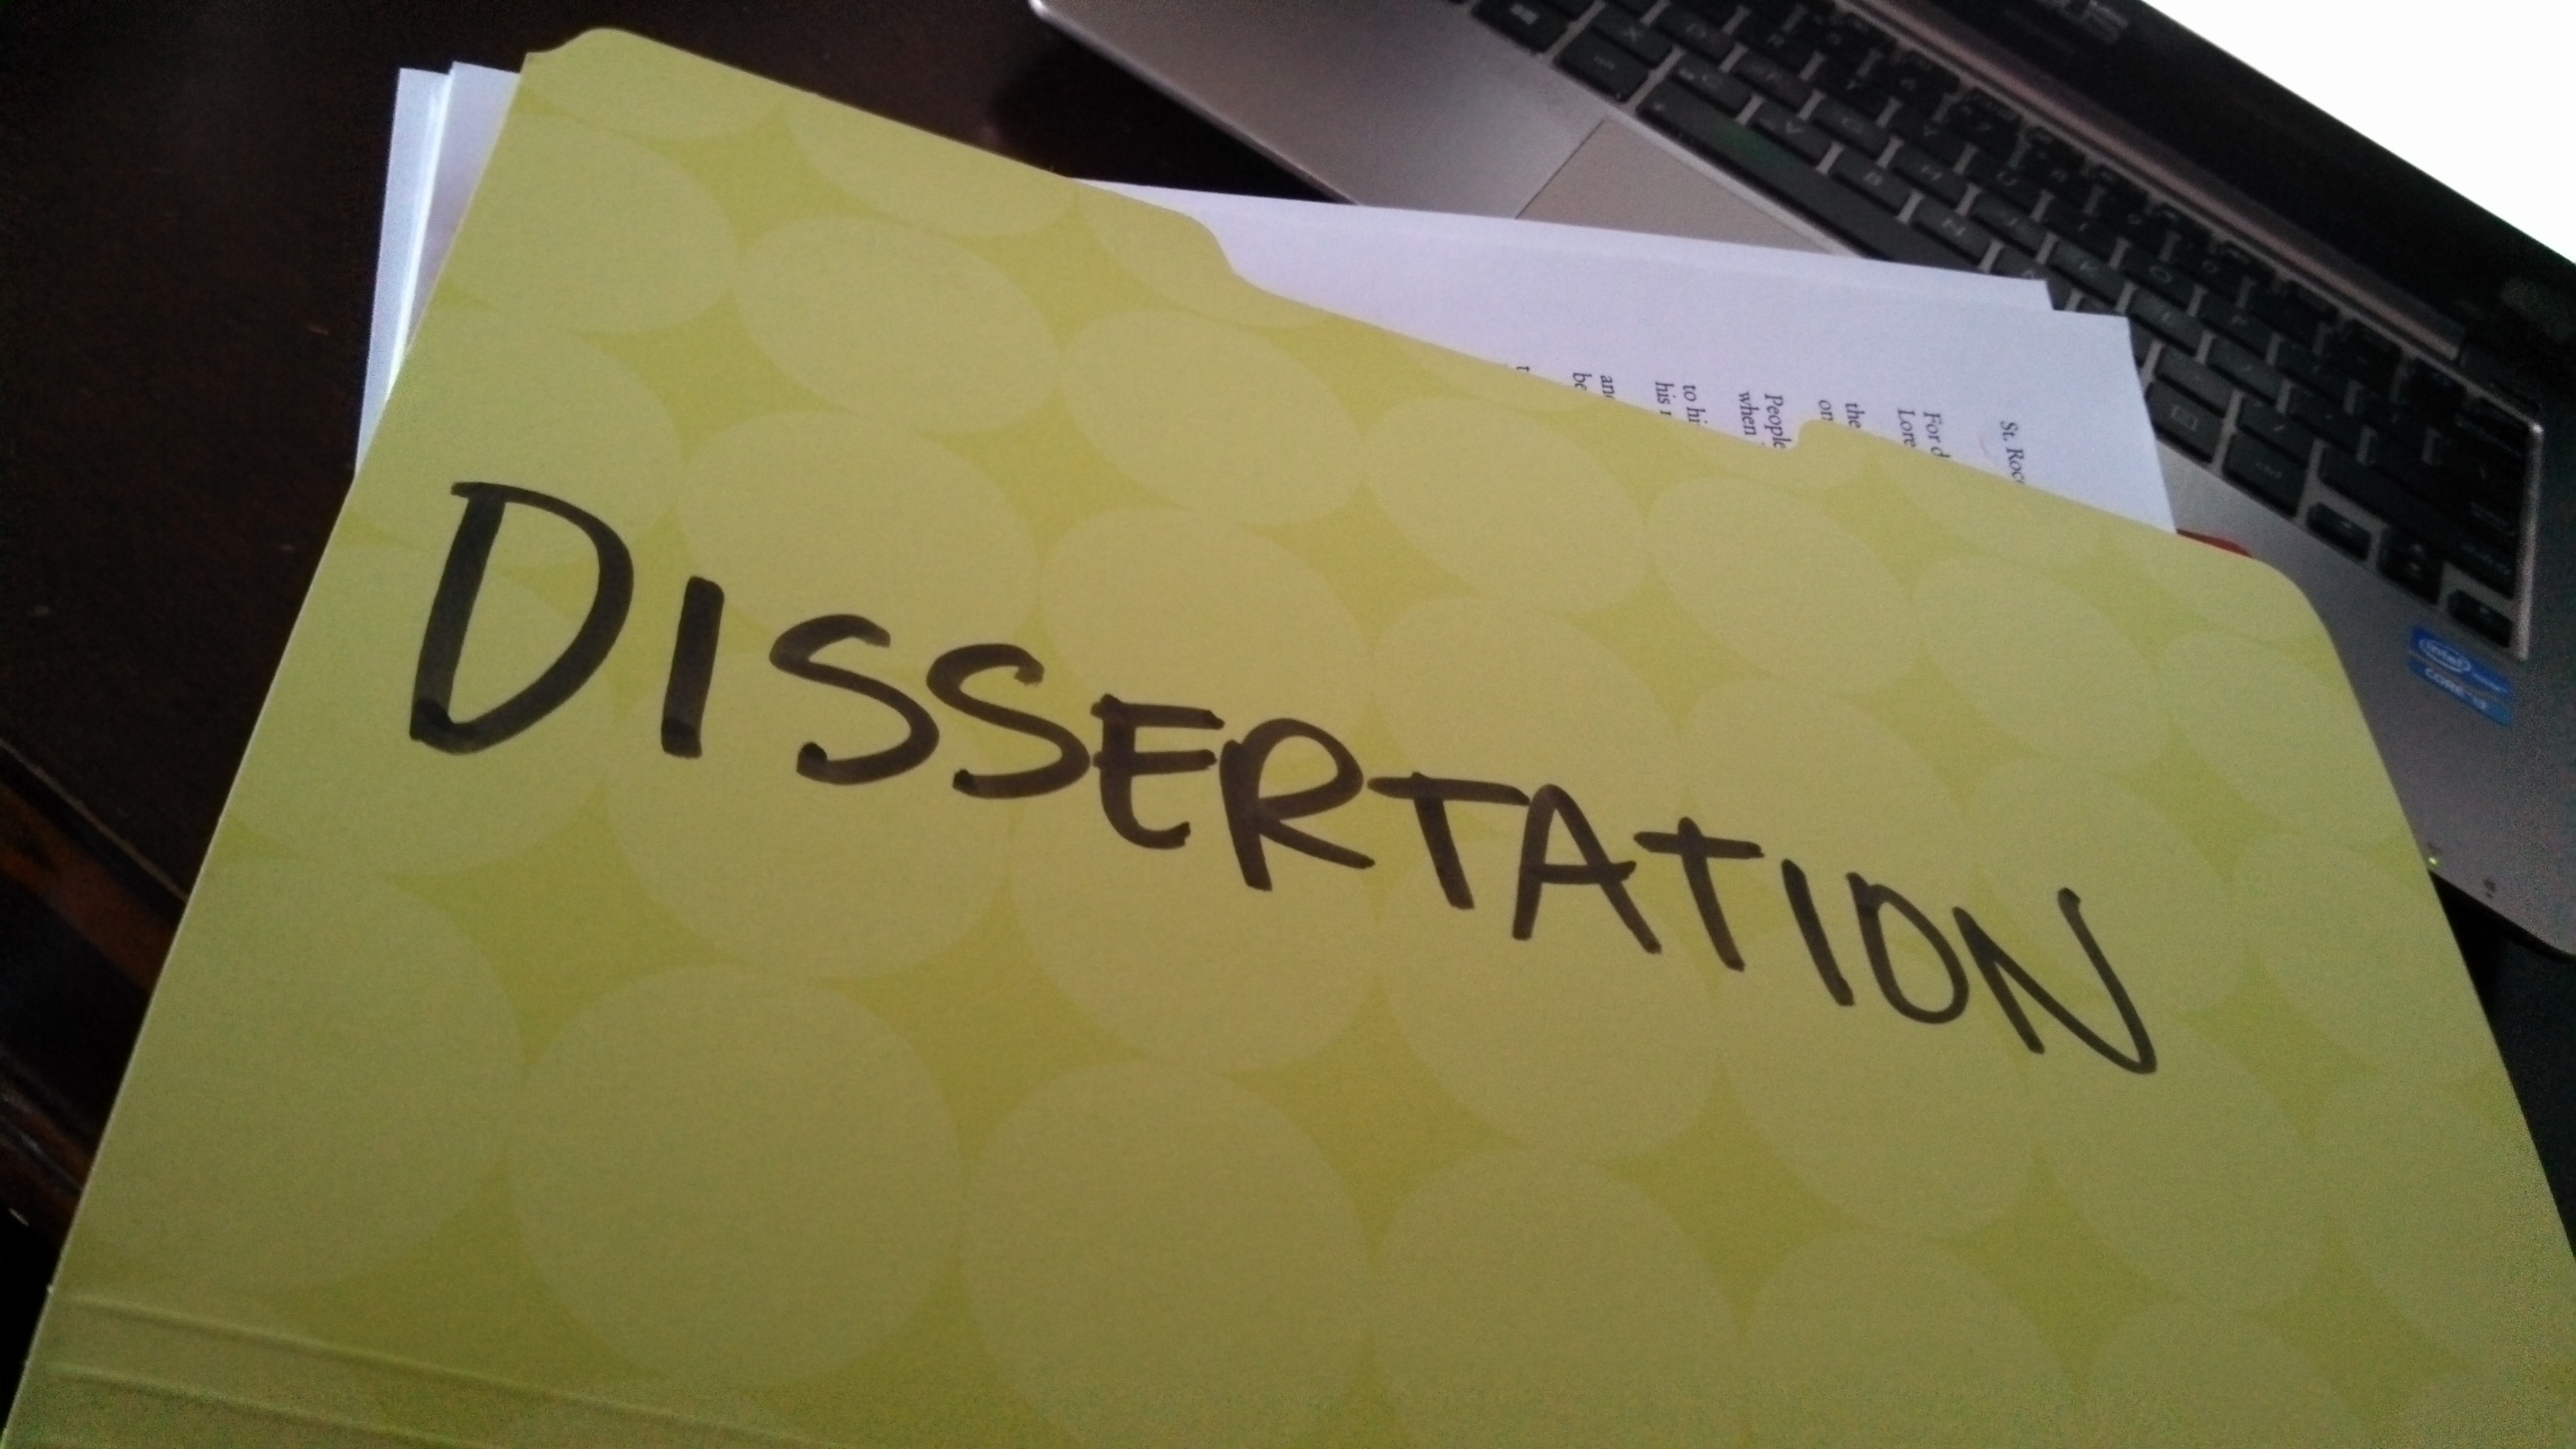 Dissertation services in uk vs thesis